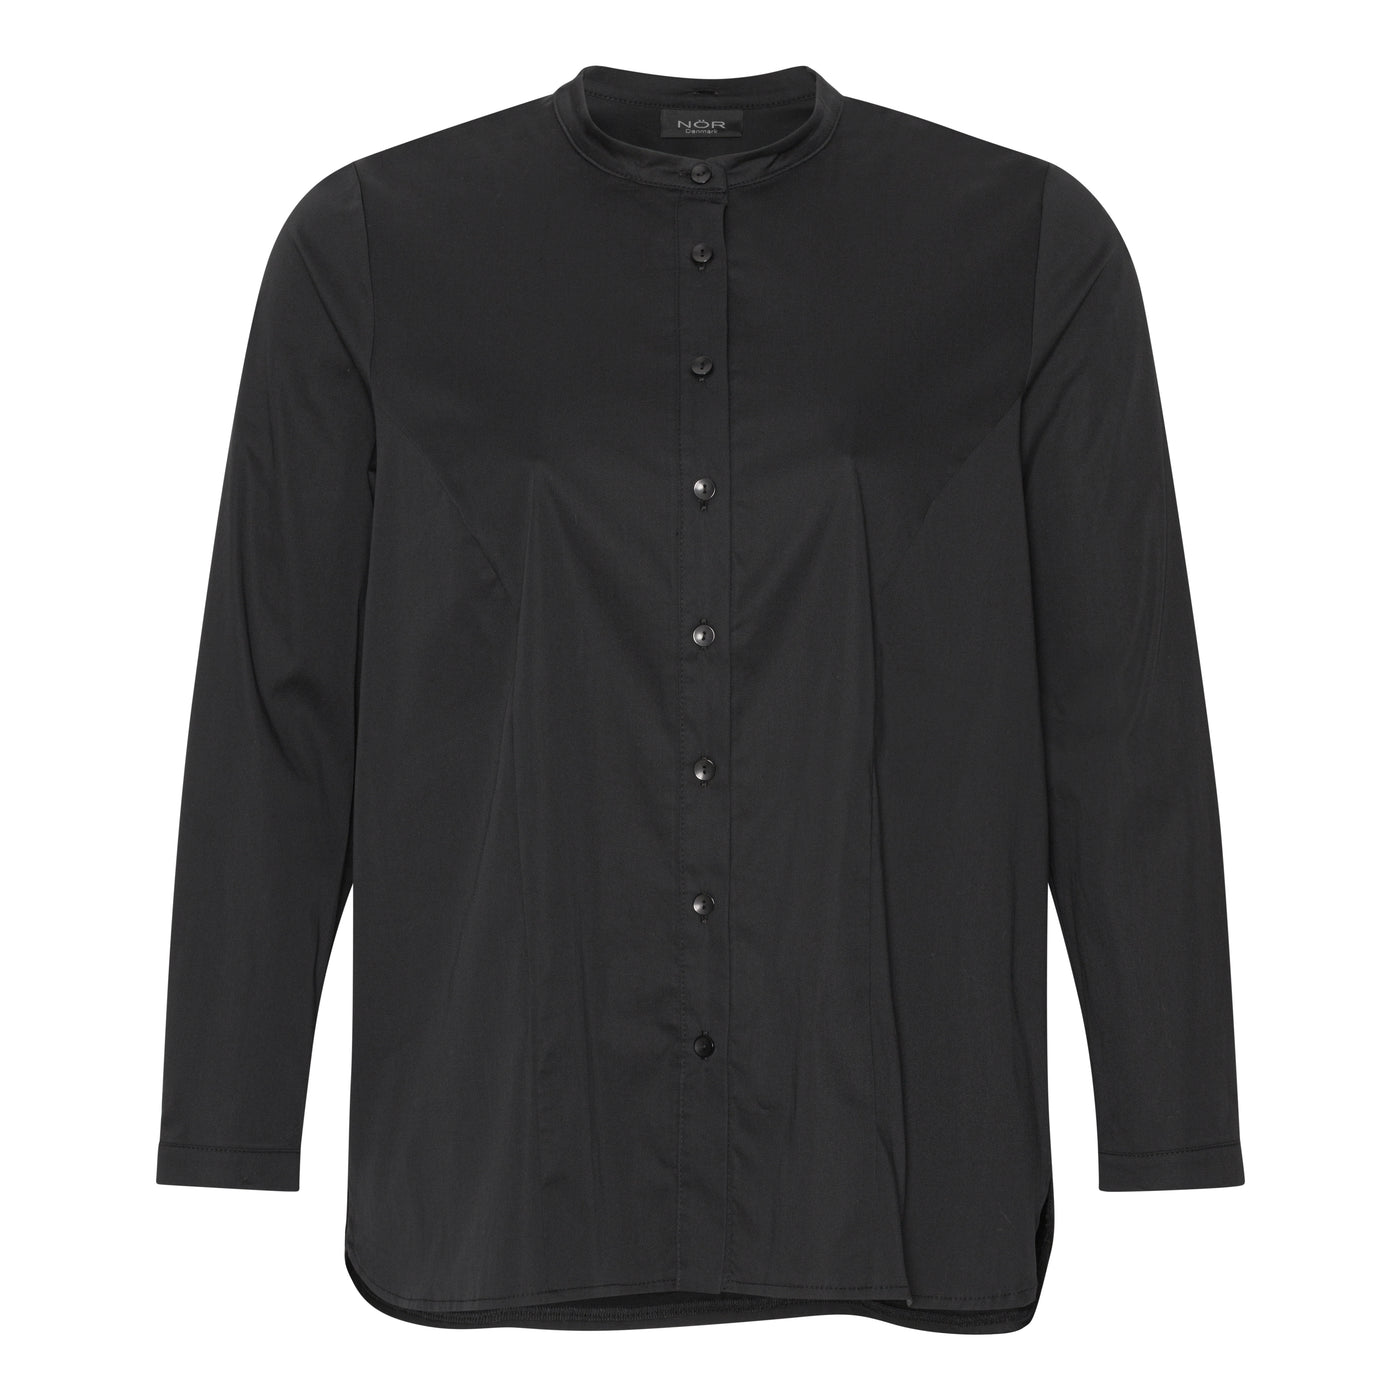 Two shirts in one. With replaceable collar/cuff. Perfect as a light jacket on a summer day.